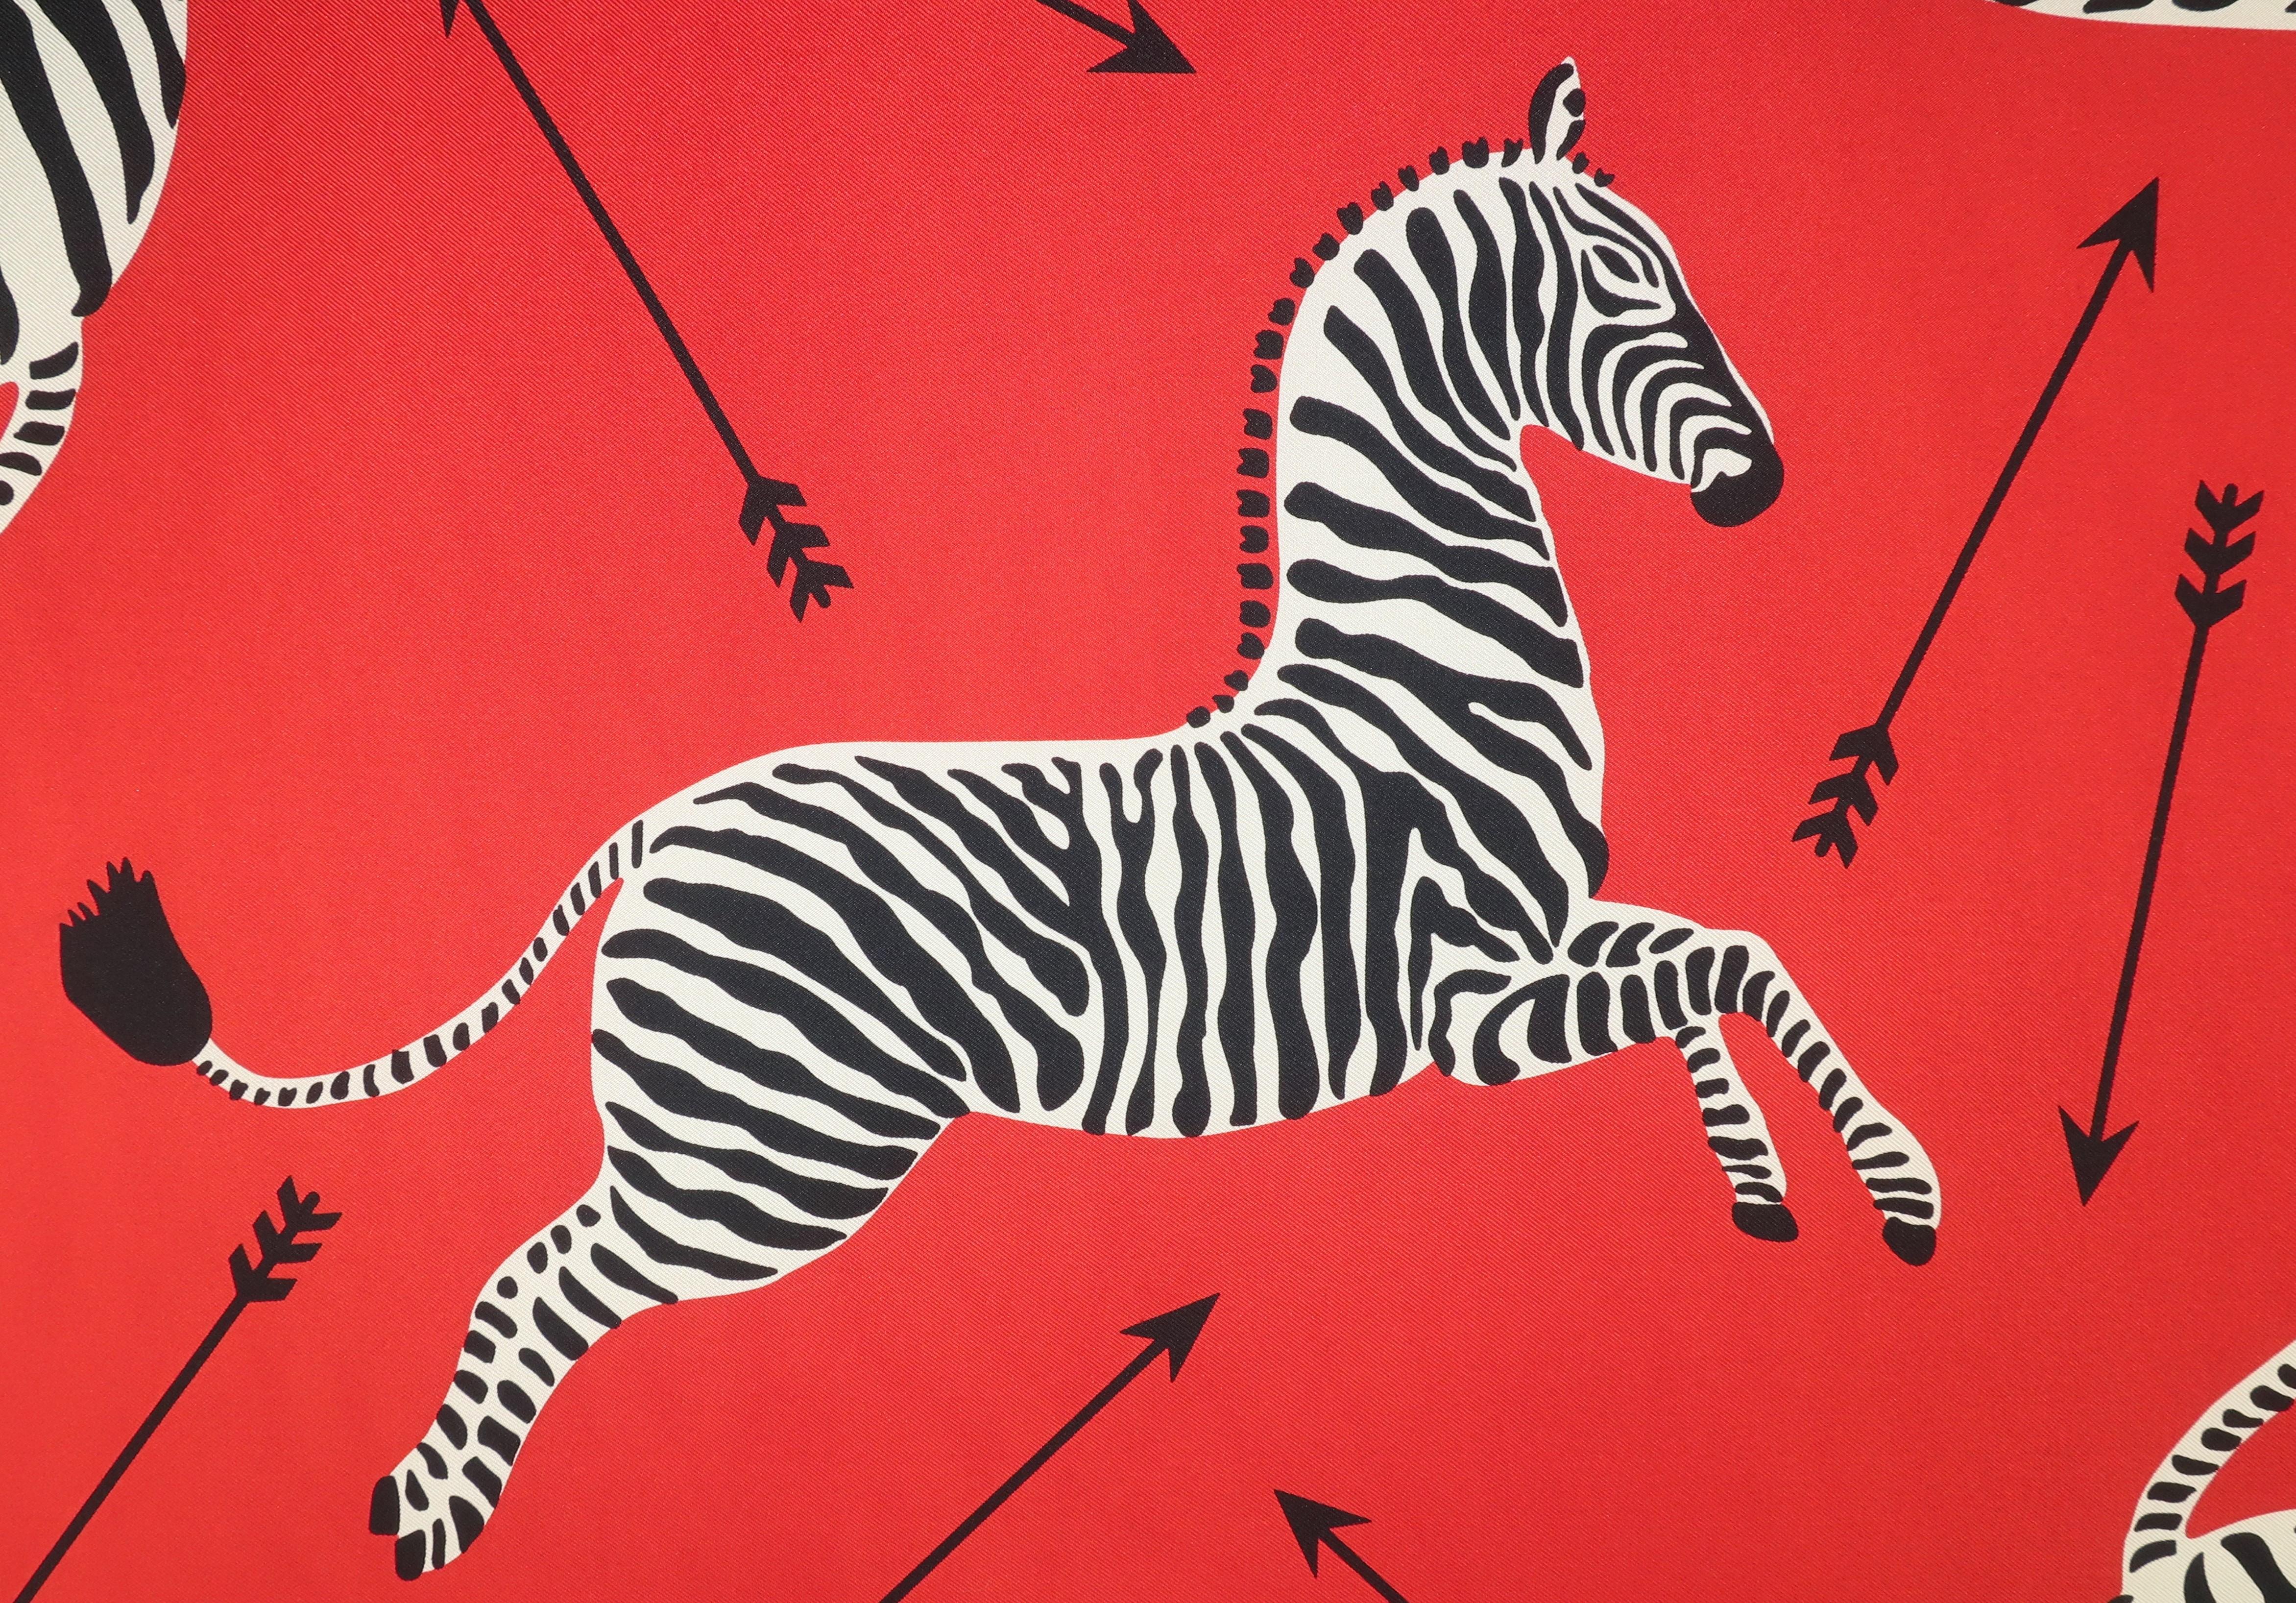 The iconic zebra pattern by Scalamandre dates back to the 1940’s.  It is a playful design with elements of Art Deco and modernism all captured in red, black and white high quality silk.  A wonderful fashion accessory with the potential to be a